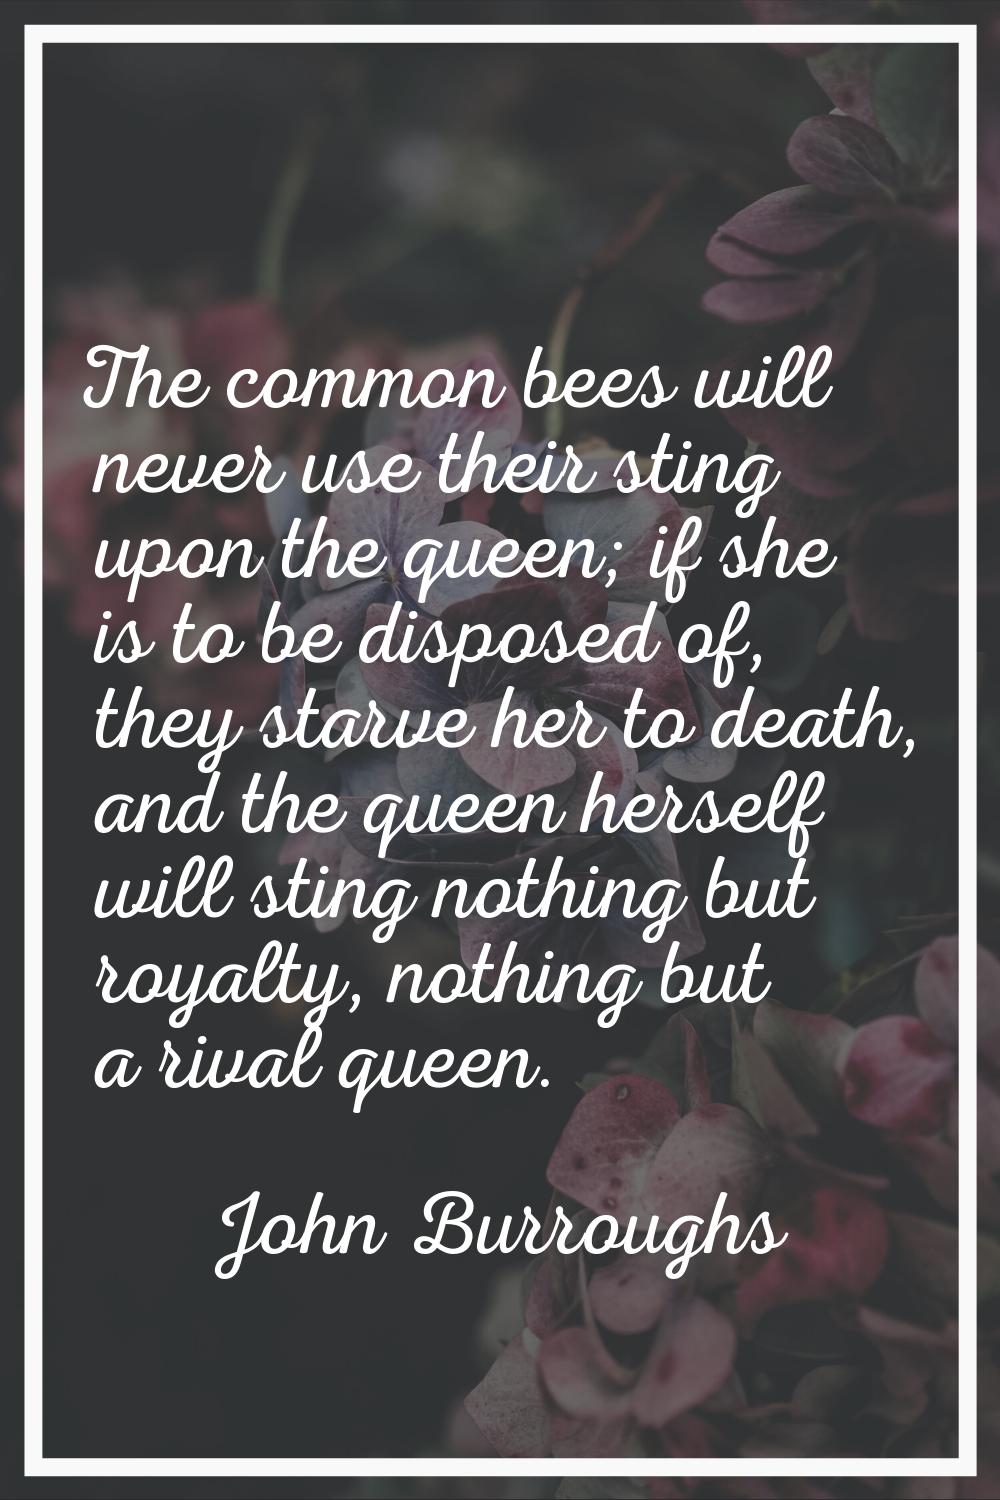 The common bees will never use their sting upon the queen; if she is to be disposed of, they starve